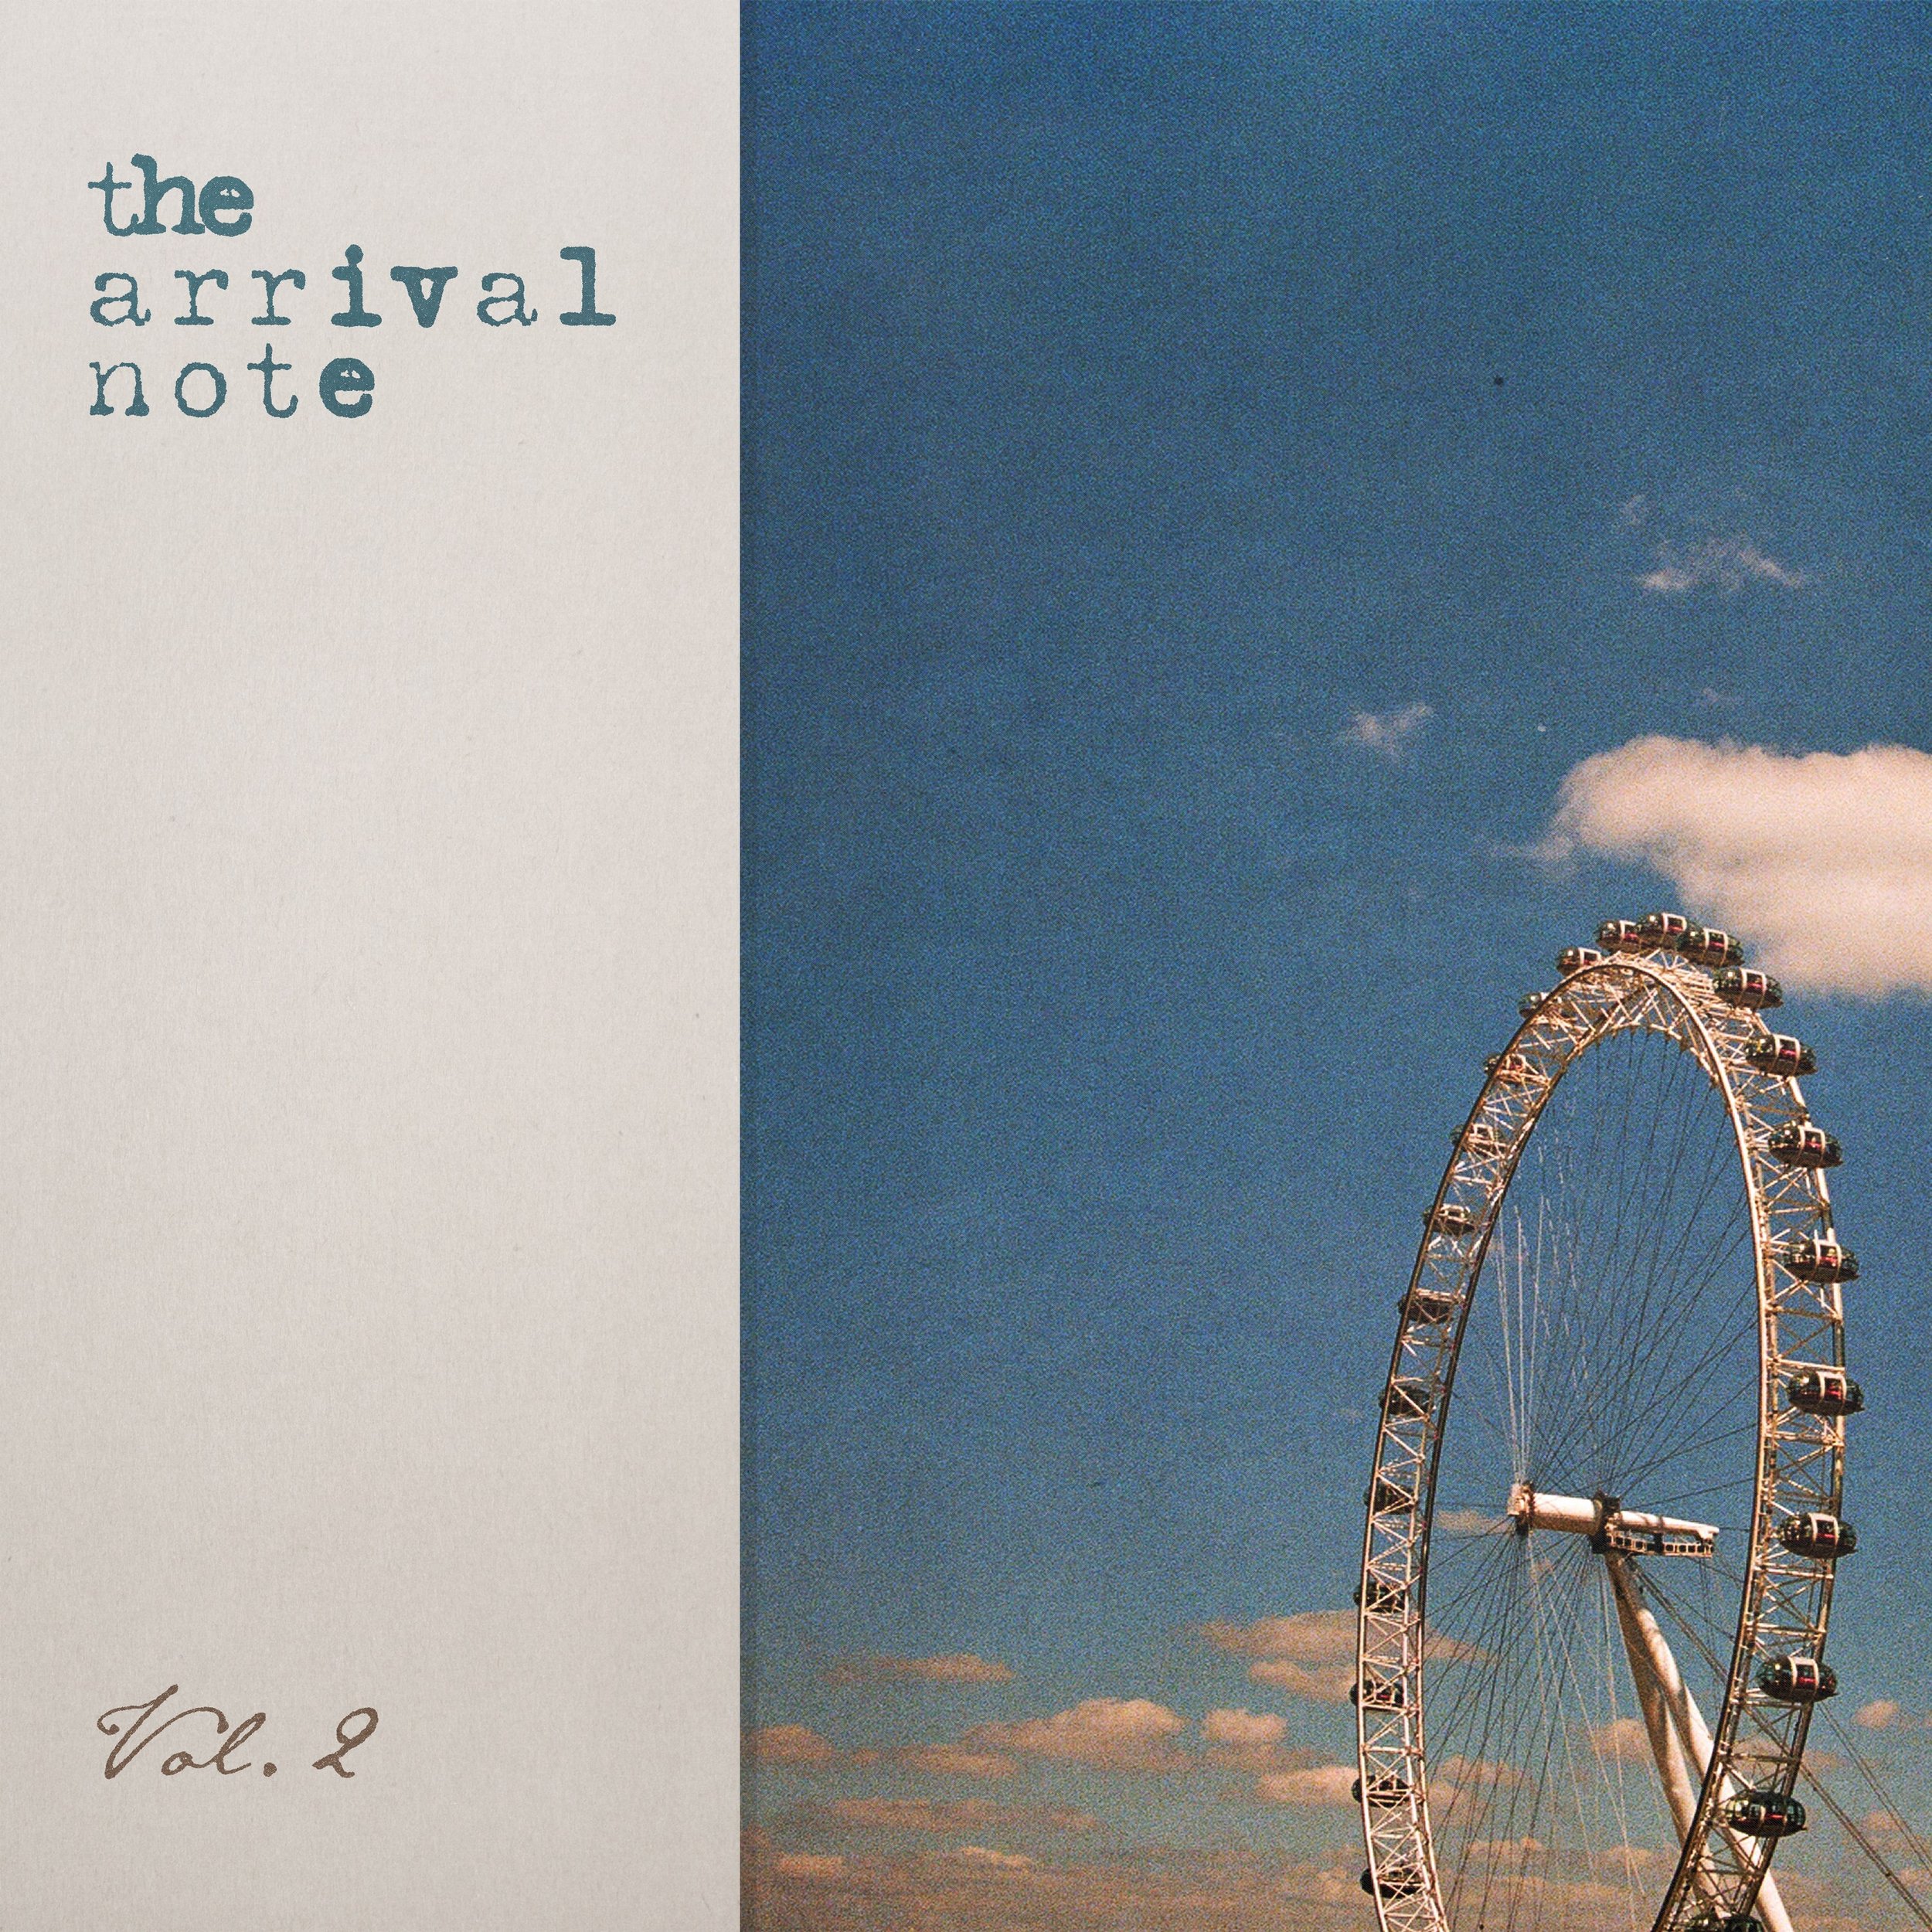 The Arrival Note - Vol. 2. - Cover.jpg